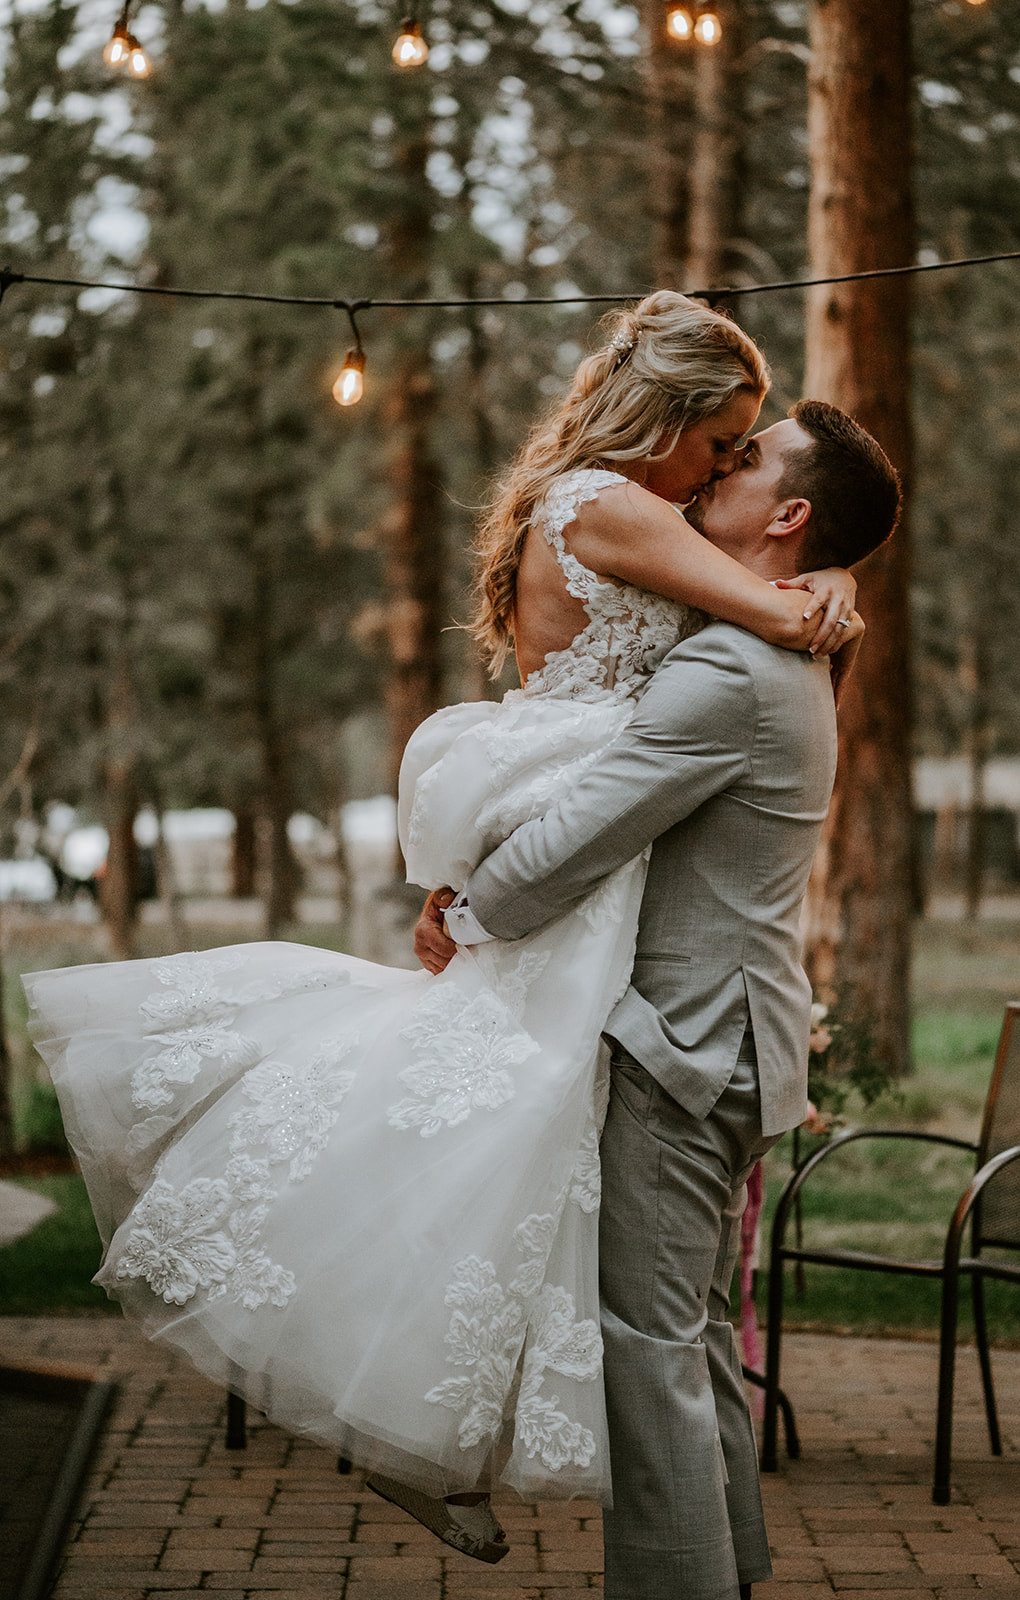 Groom lifting bride up and kissing her at their spring wedding